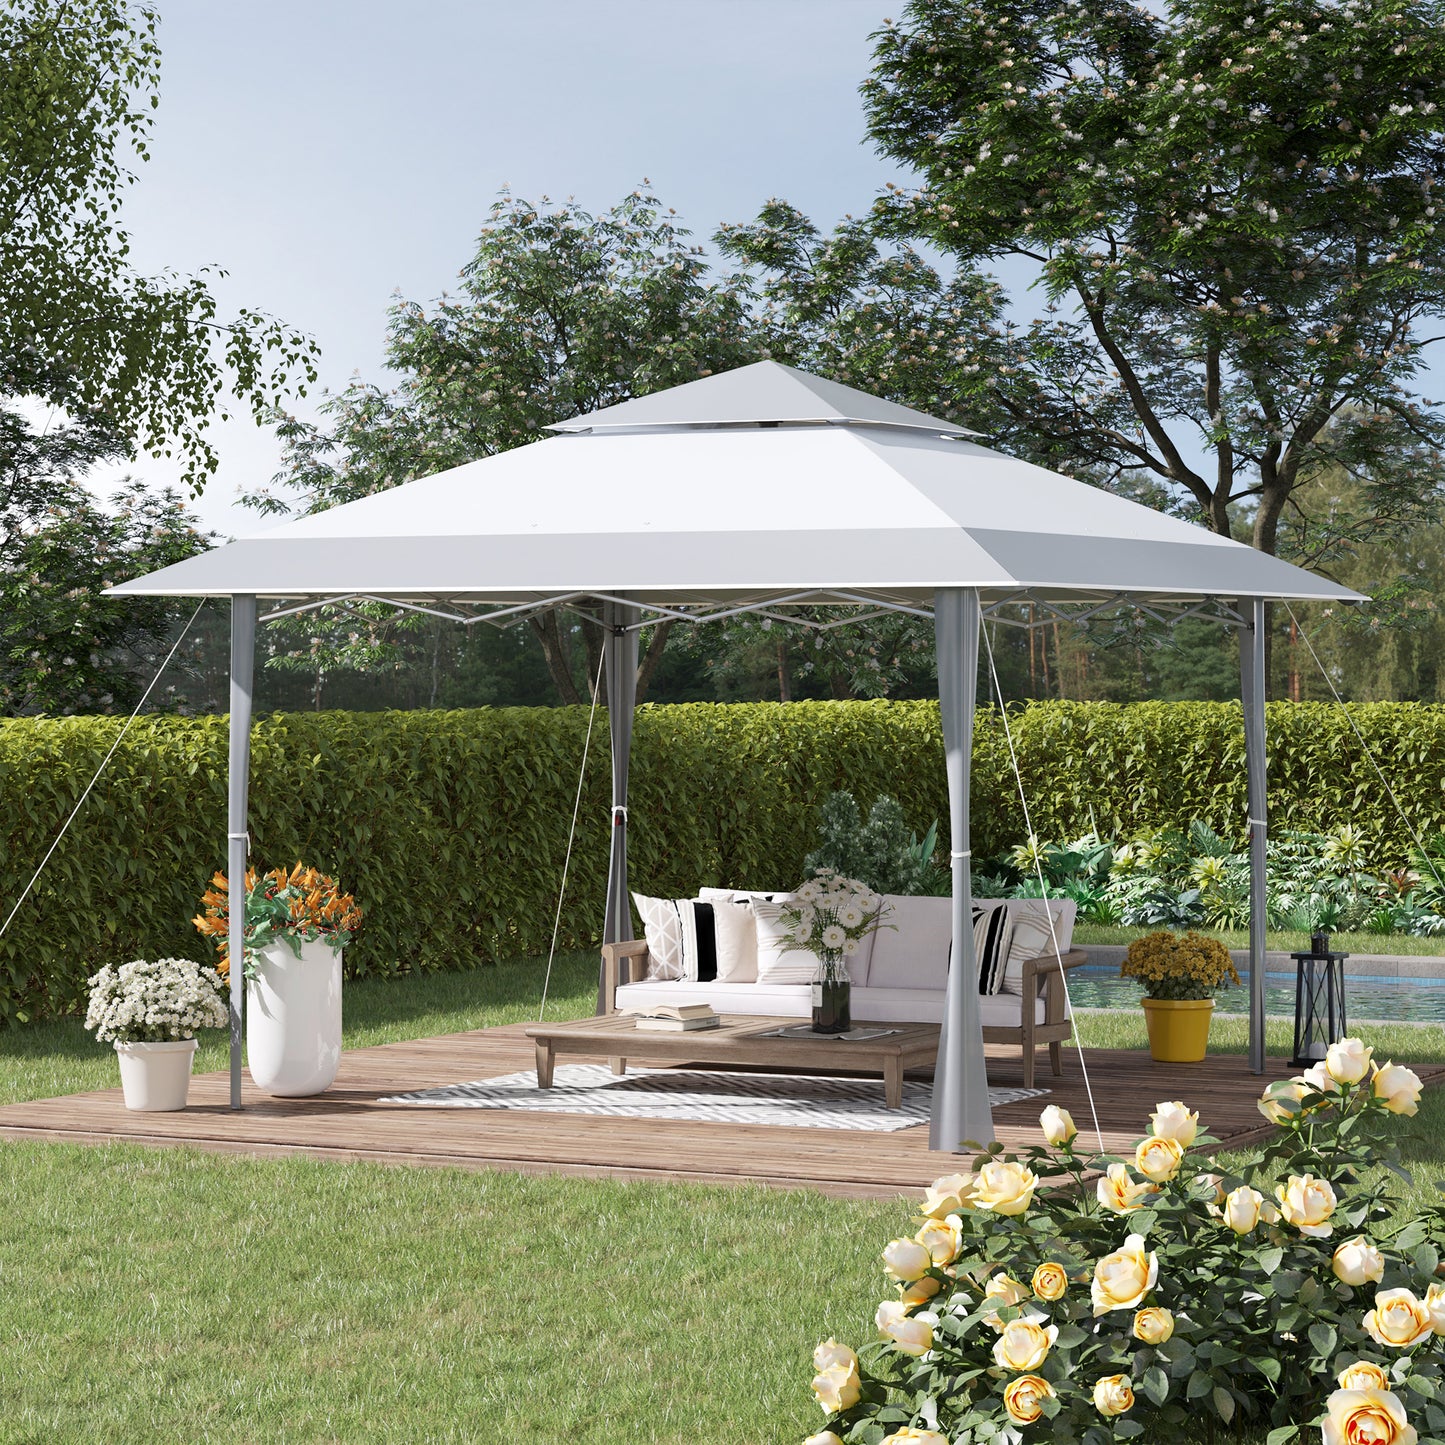 Outsunny 4 x 4m Outdoor Pop Up Canopy Tent Gazebo w/ Adjustable Legs and Bag White